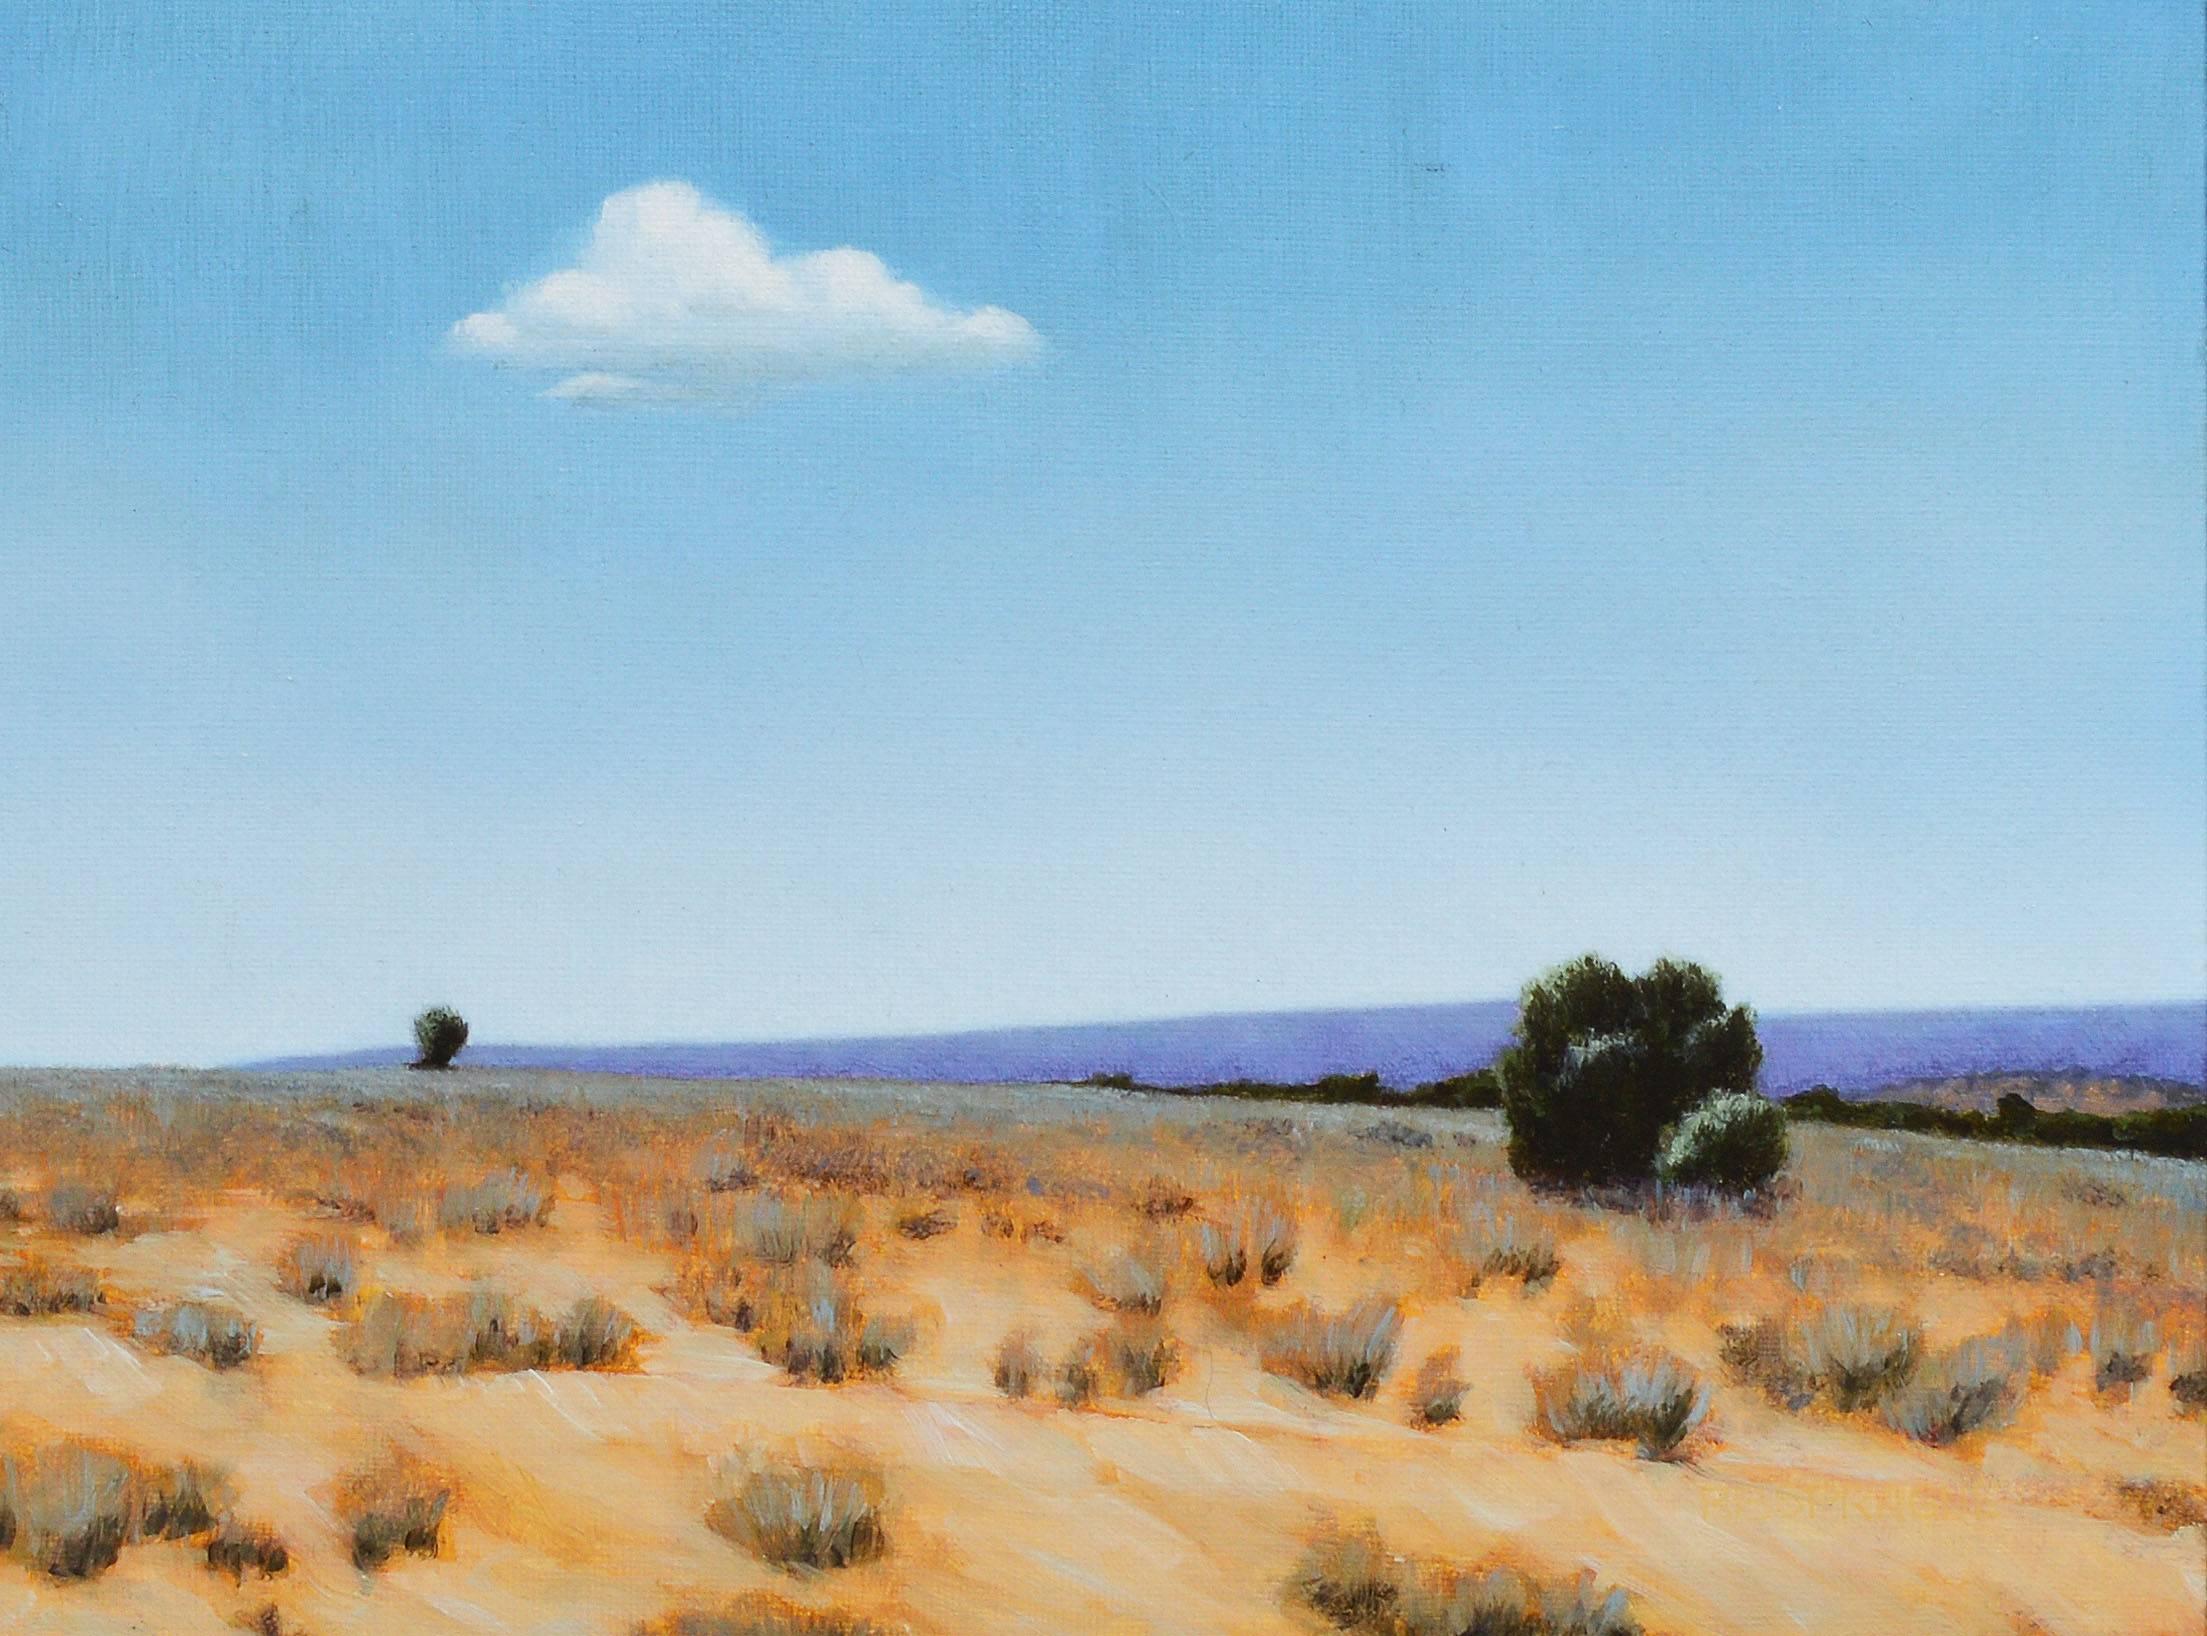 Realist view of Black Mesa in Oklahoma by R B Sprague  (1937 - 2010).  Oil on canvas, circa 1986.  Unsigned.  Displayed in a period frame.  Image size, 12